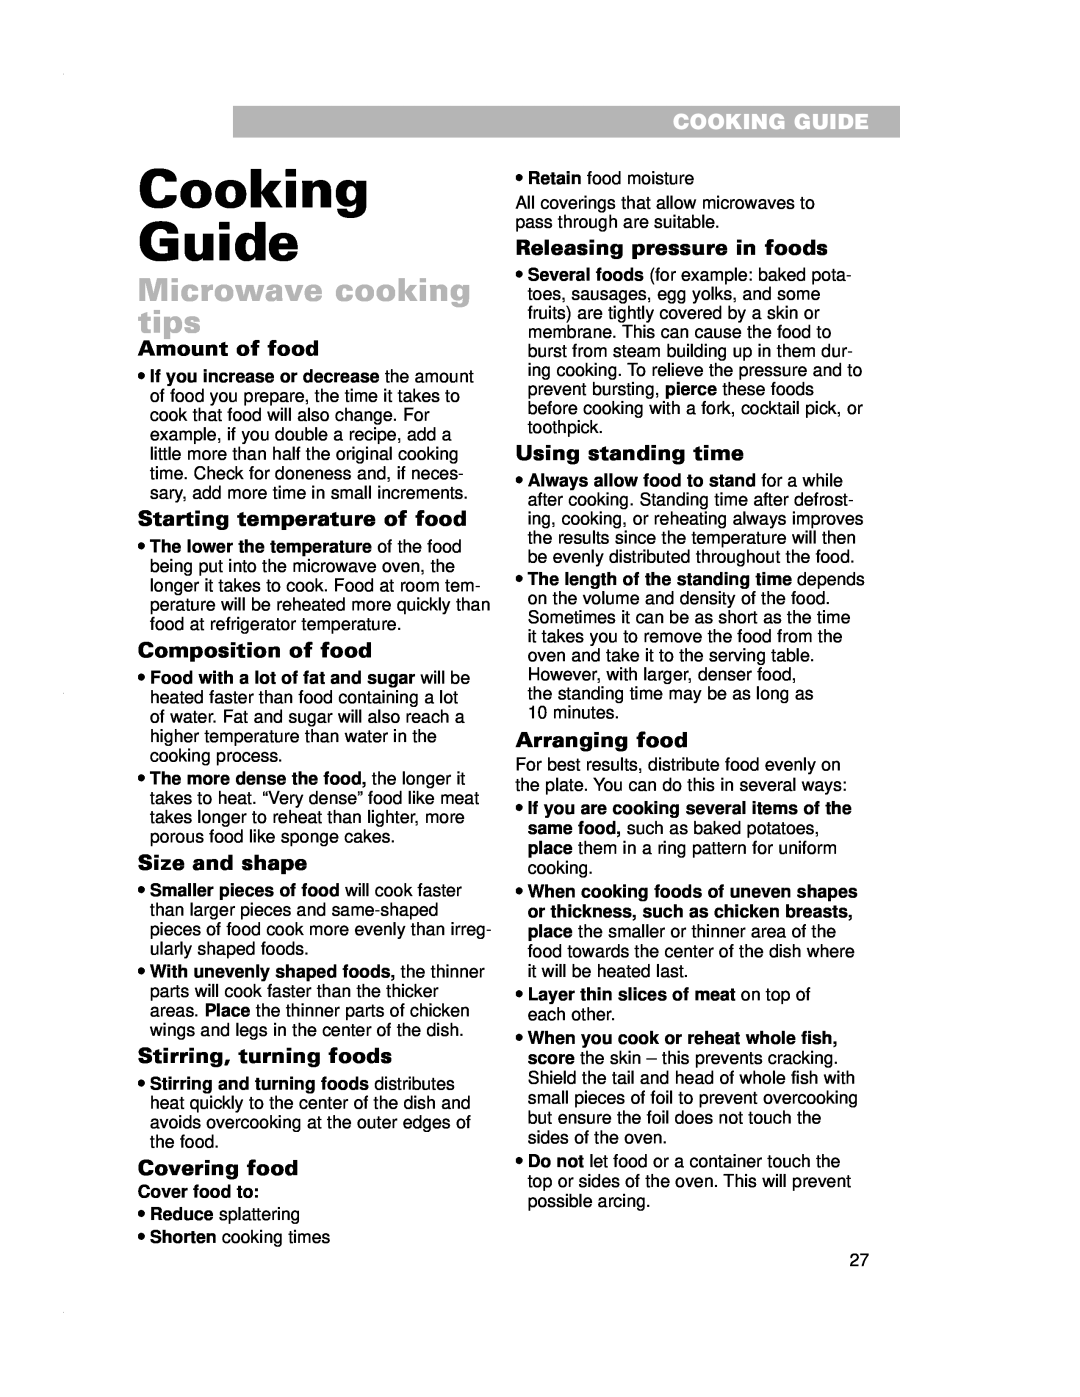 Crosley CMT135SG Cooking Guide, Microwave cooking tips, Amount of food, Starting temperature of food, Composition of food 